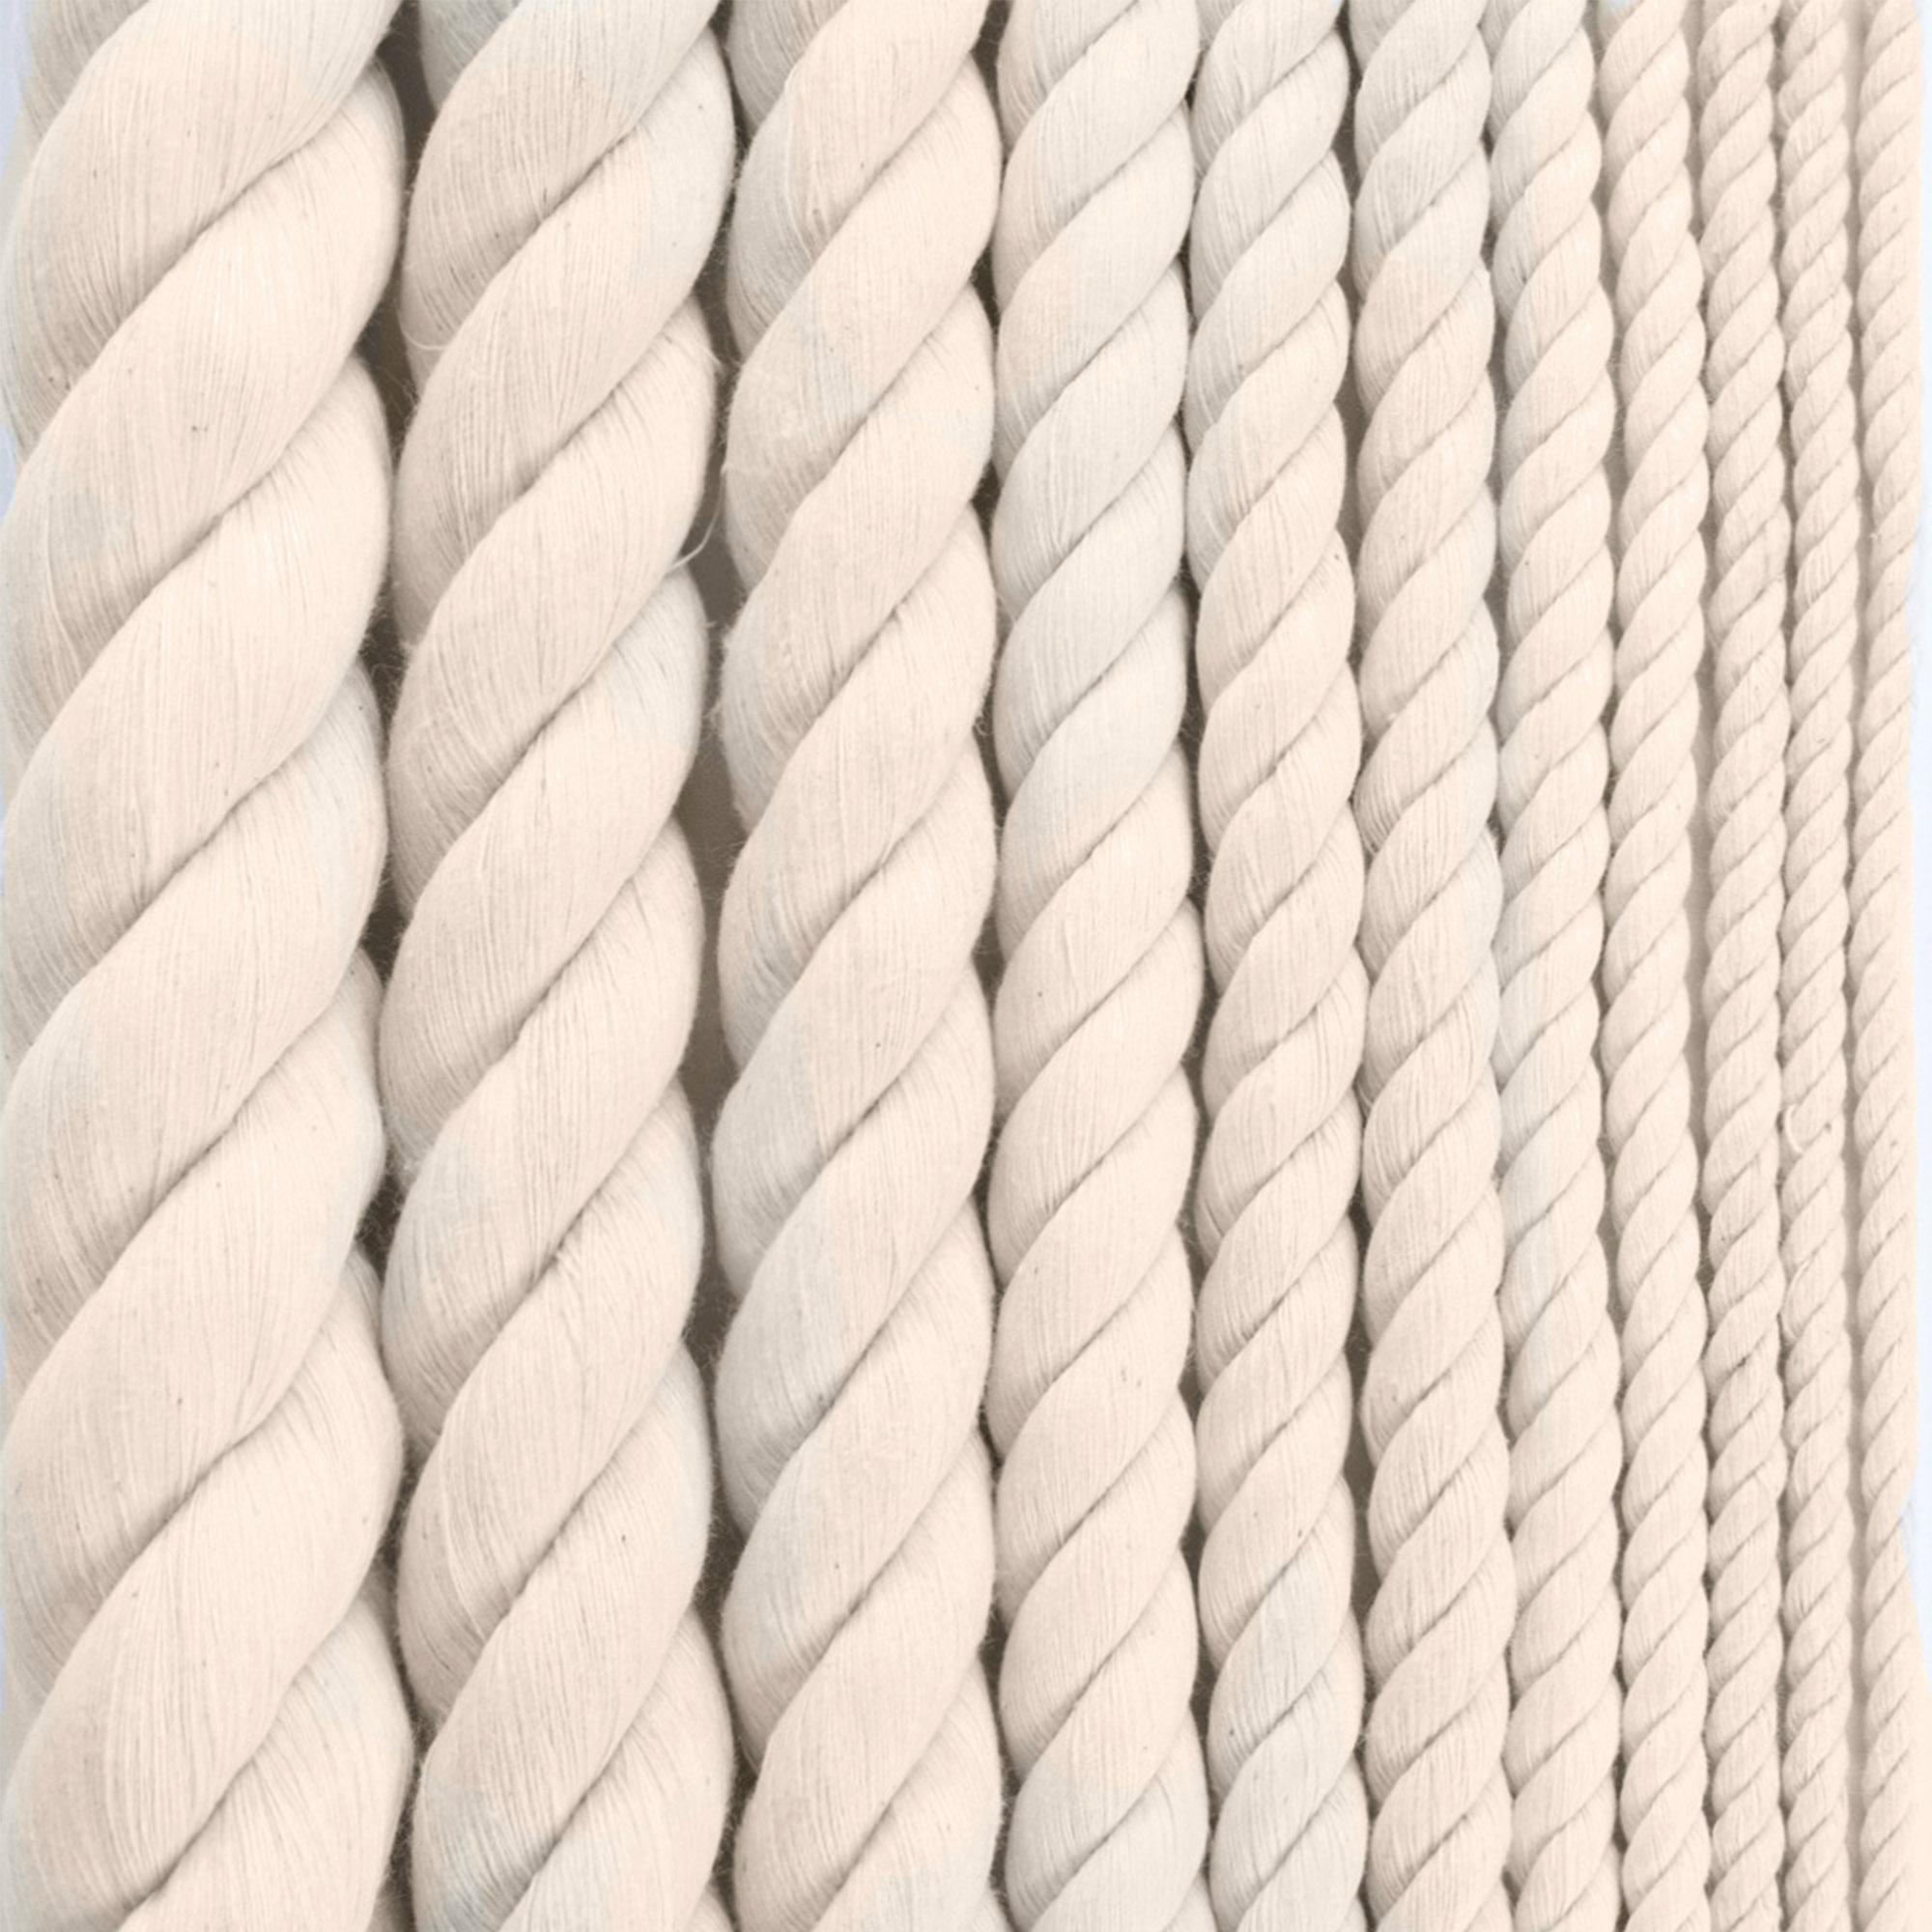 Golberg 100% Natural Cotton Rope - 5/32, 3/16, 7/32, 1/4, 5/16, 3/8, 1/2, 5/8, 3/4, 1, 1-1/4, and 1-1/2 Inch Diameters - Twisted White Cotton Rope - Several Lengths to Choose From - image 3 of 4